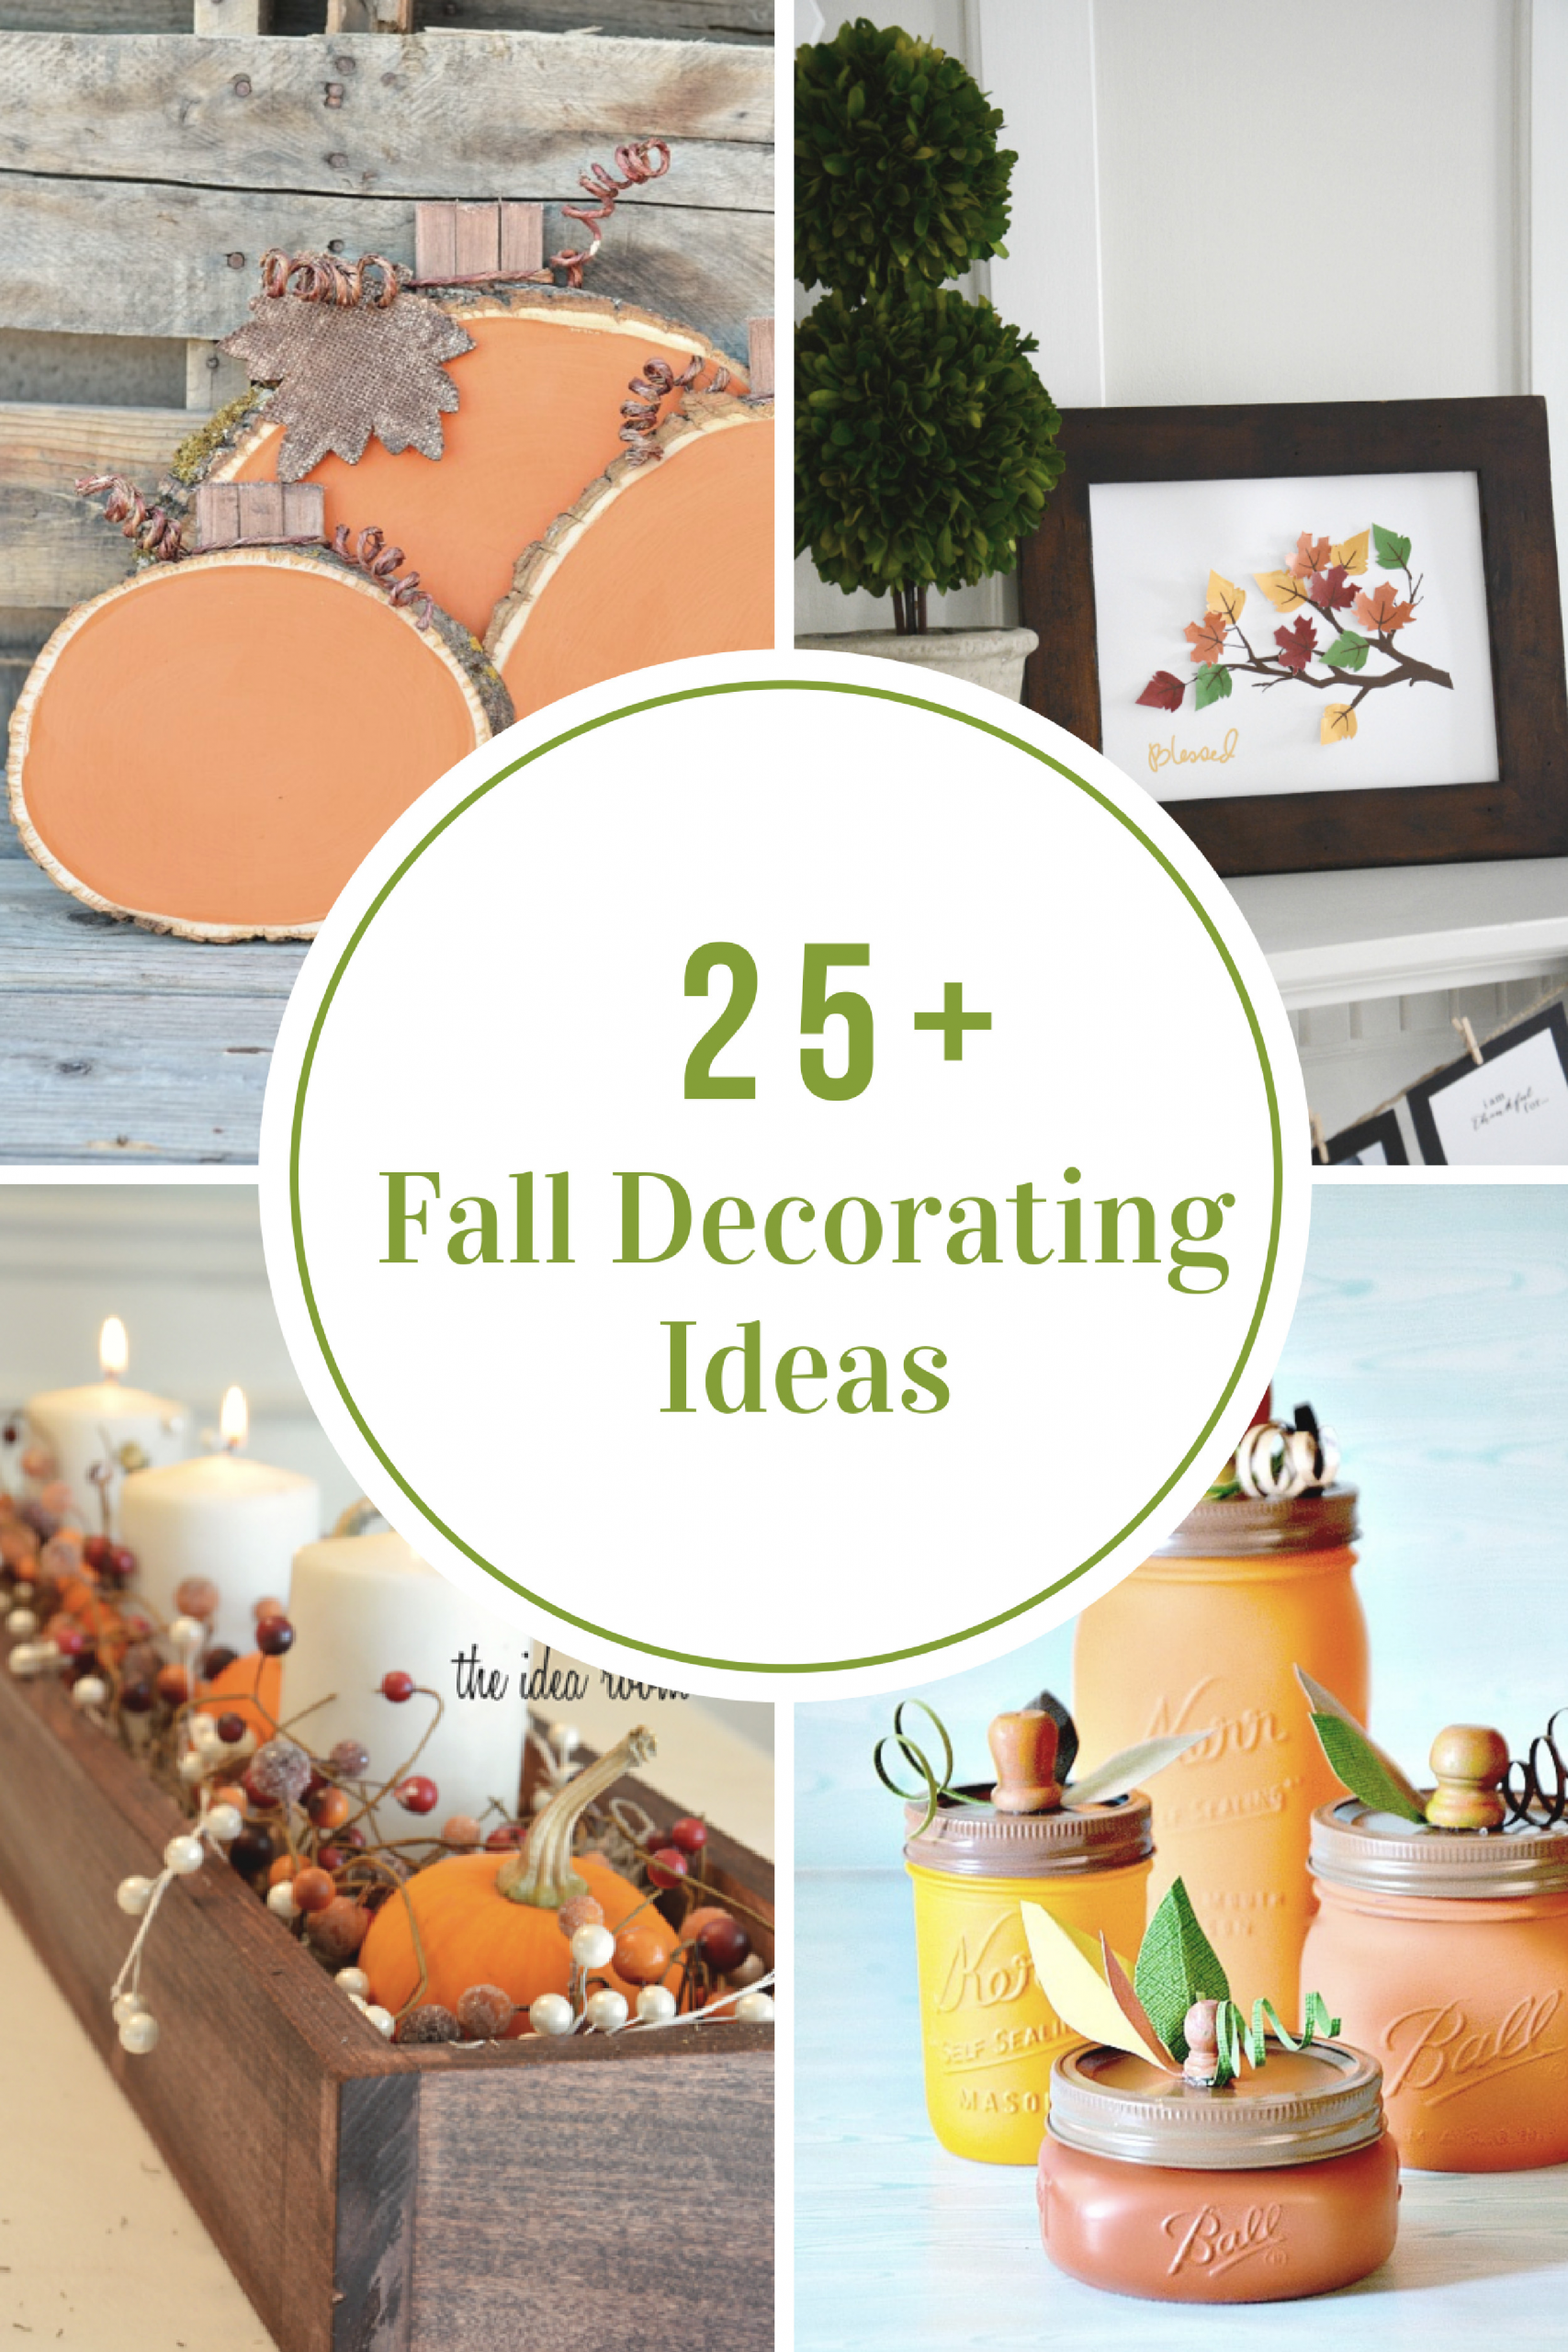 Inexpensive Fall Decorating Ideas
 Inexpensive Fall Decorating Ideas The Idea Room